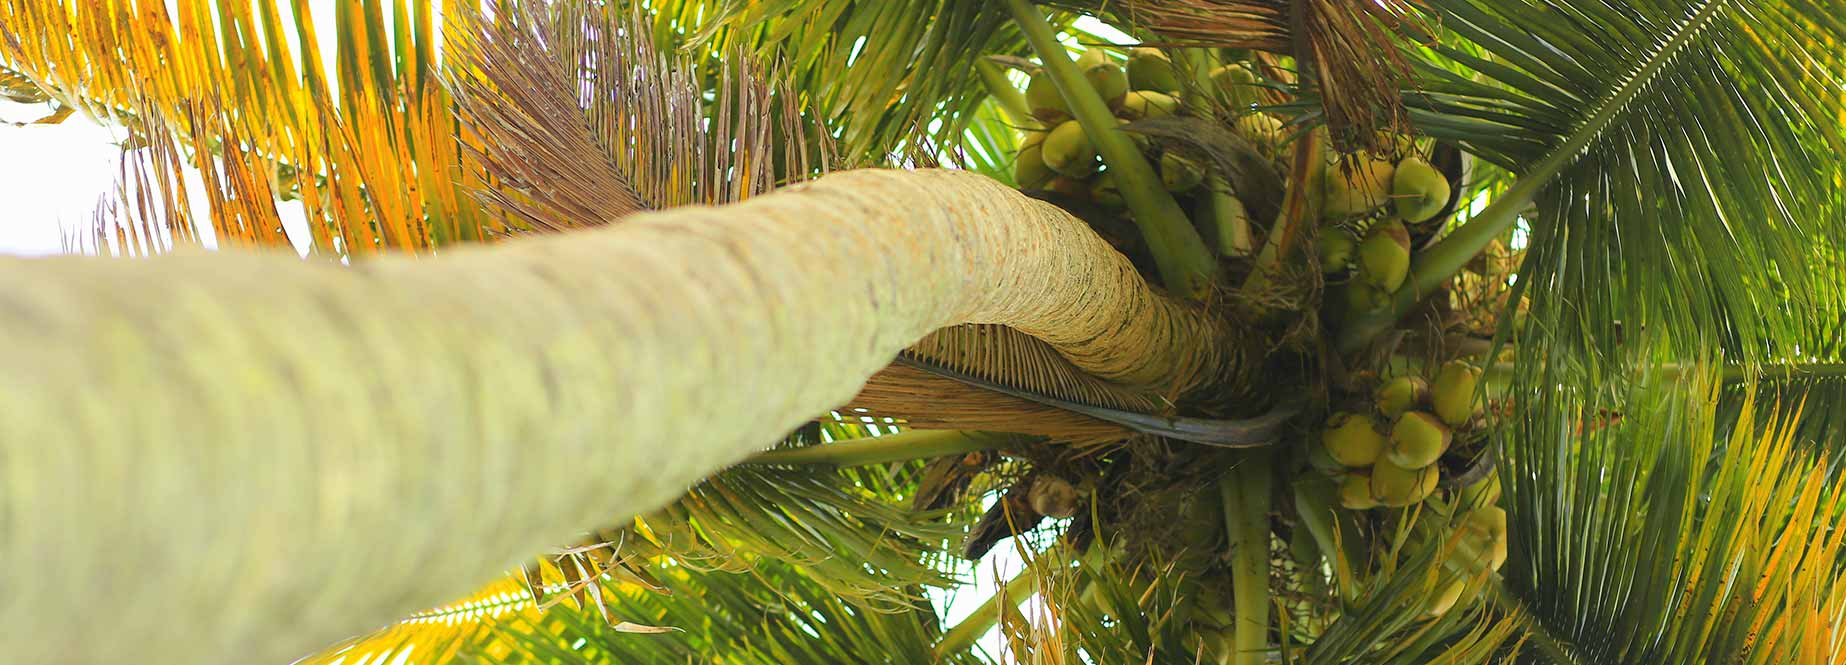 Coconut Nectar – Production Process